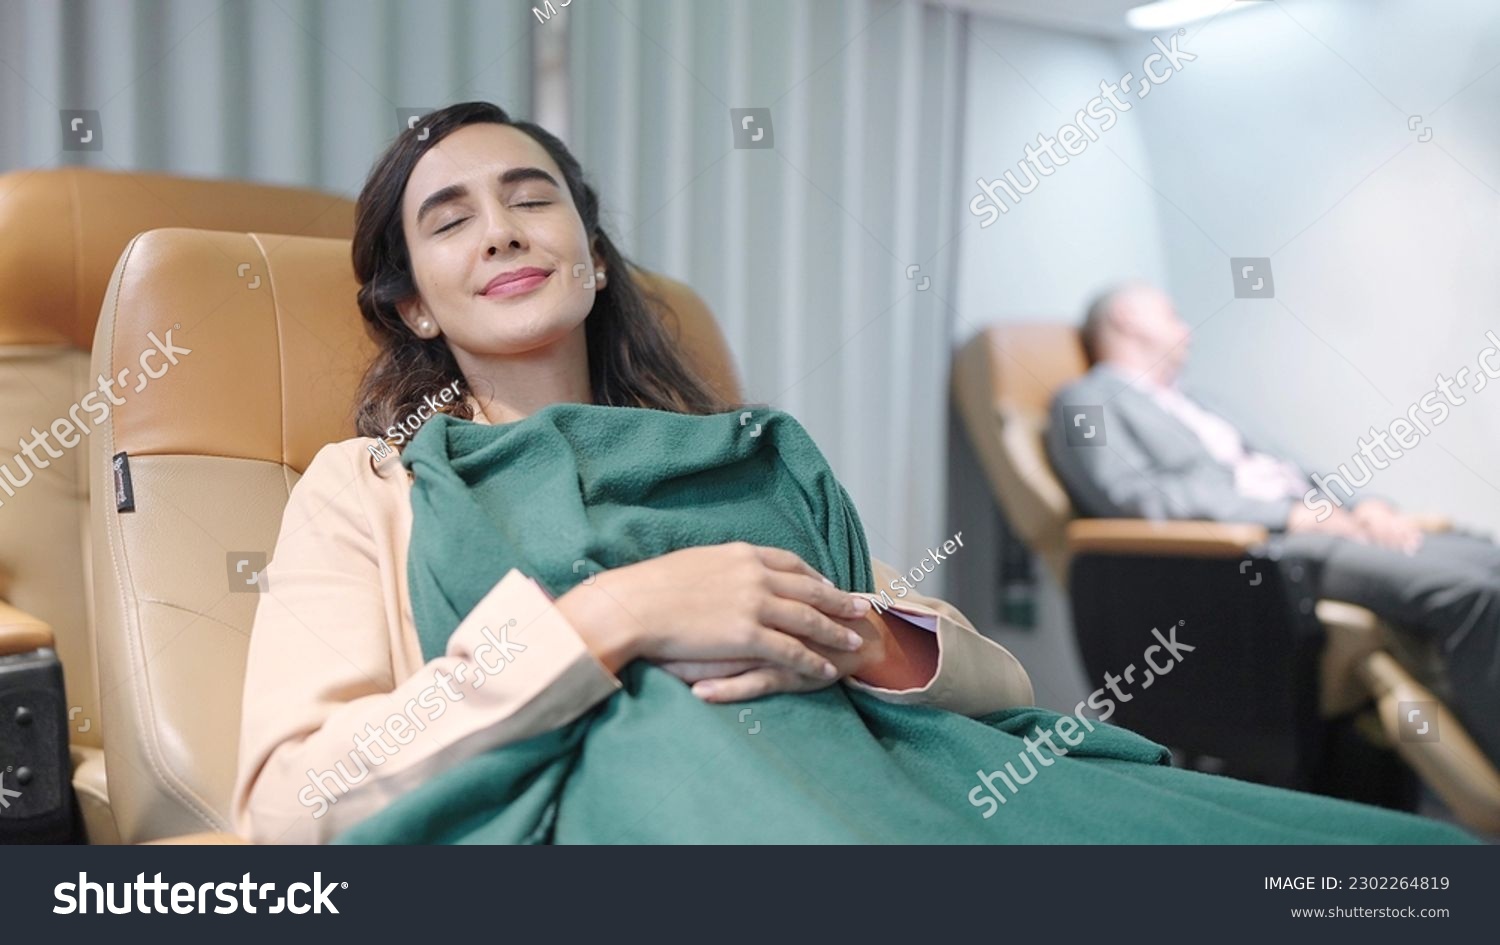 Young Hispanic latino woman passenger sleeping on seat with blanket while traveling by airplane. Woman travel on long flight #2302264819